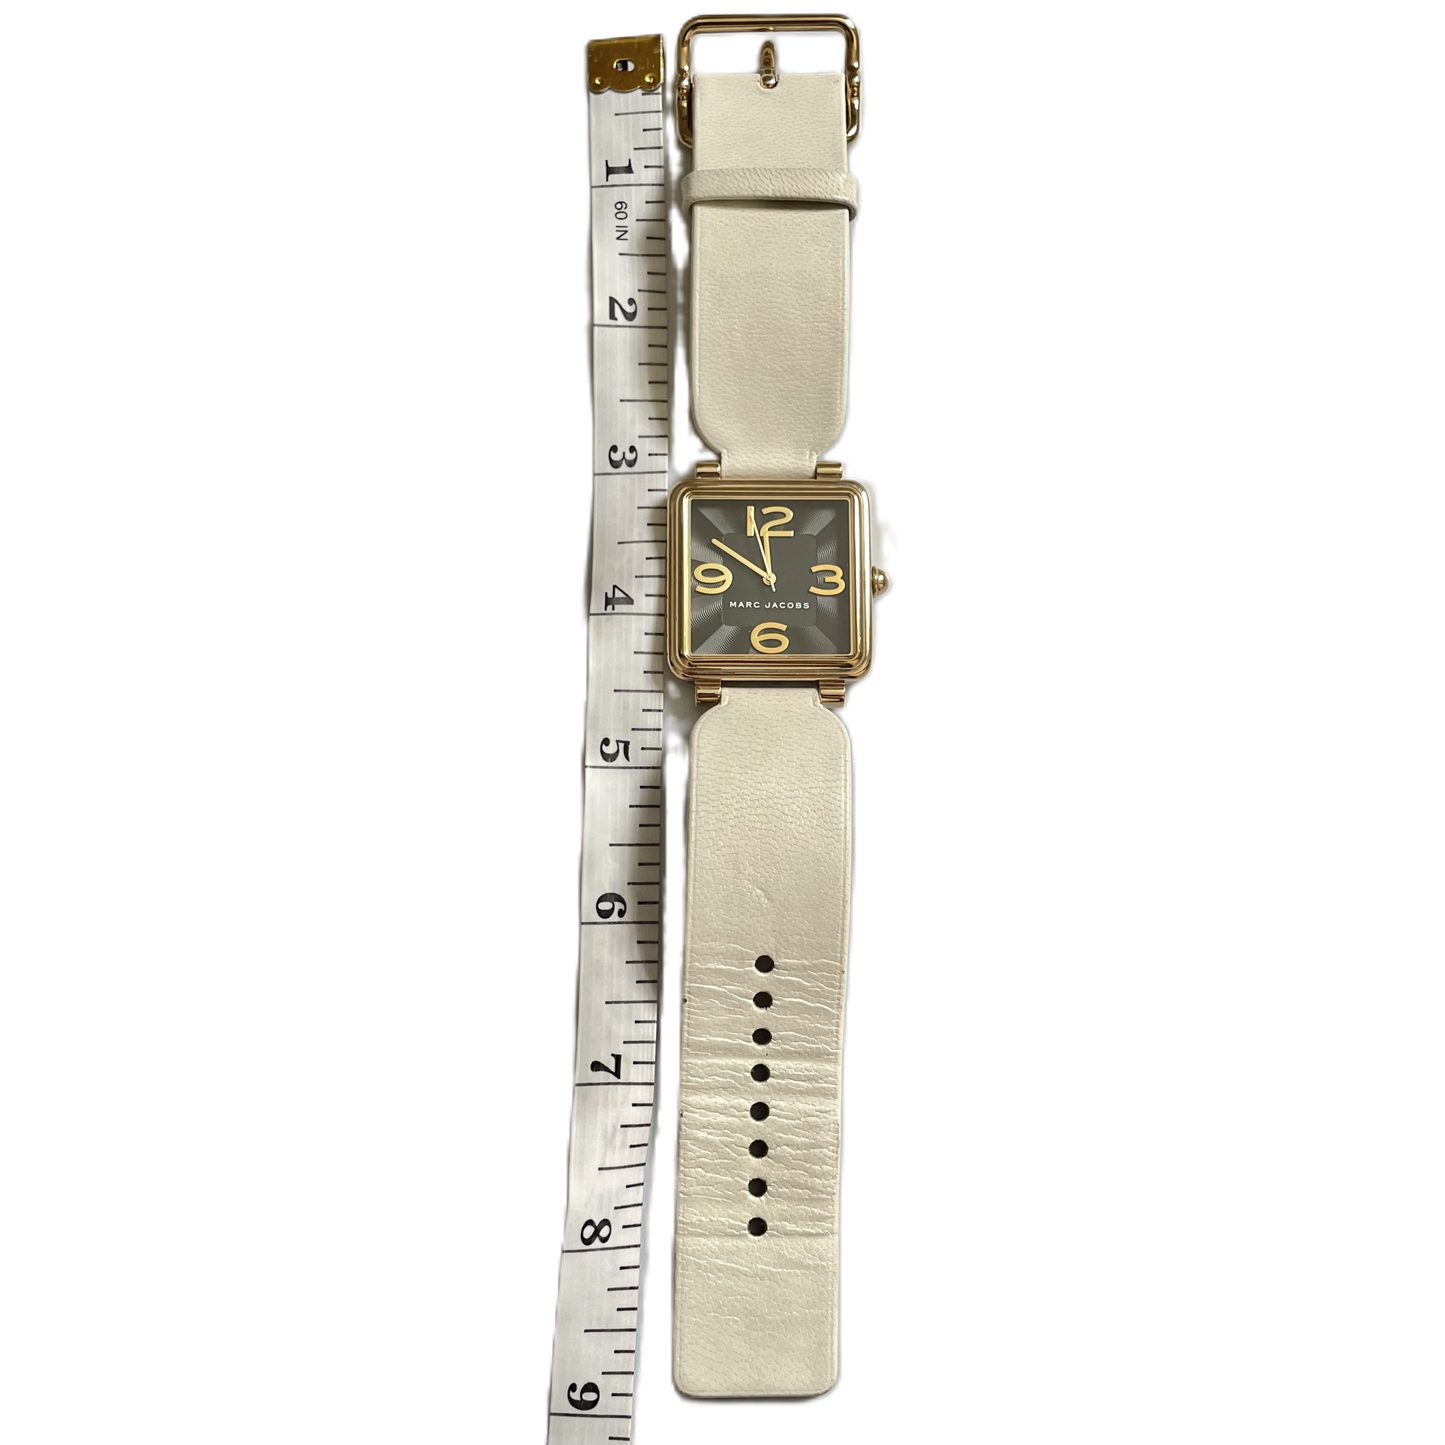 Watch Designer By Marc Jacobs